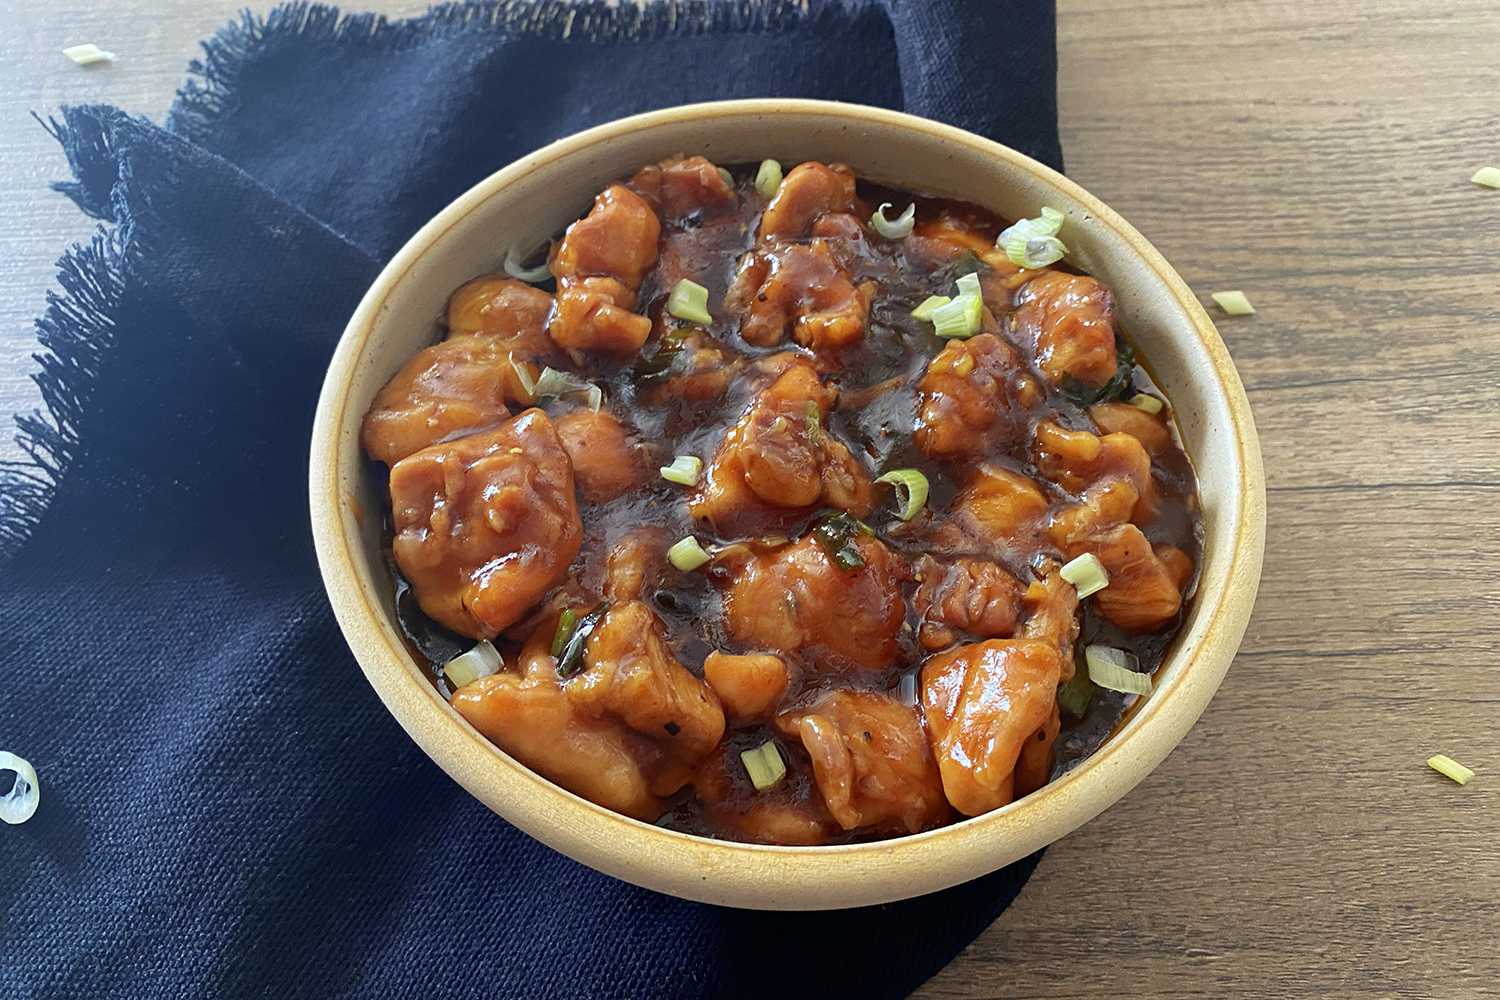 Chicken chunks in a brown sugary sauce with chopped scallion on top